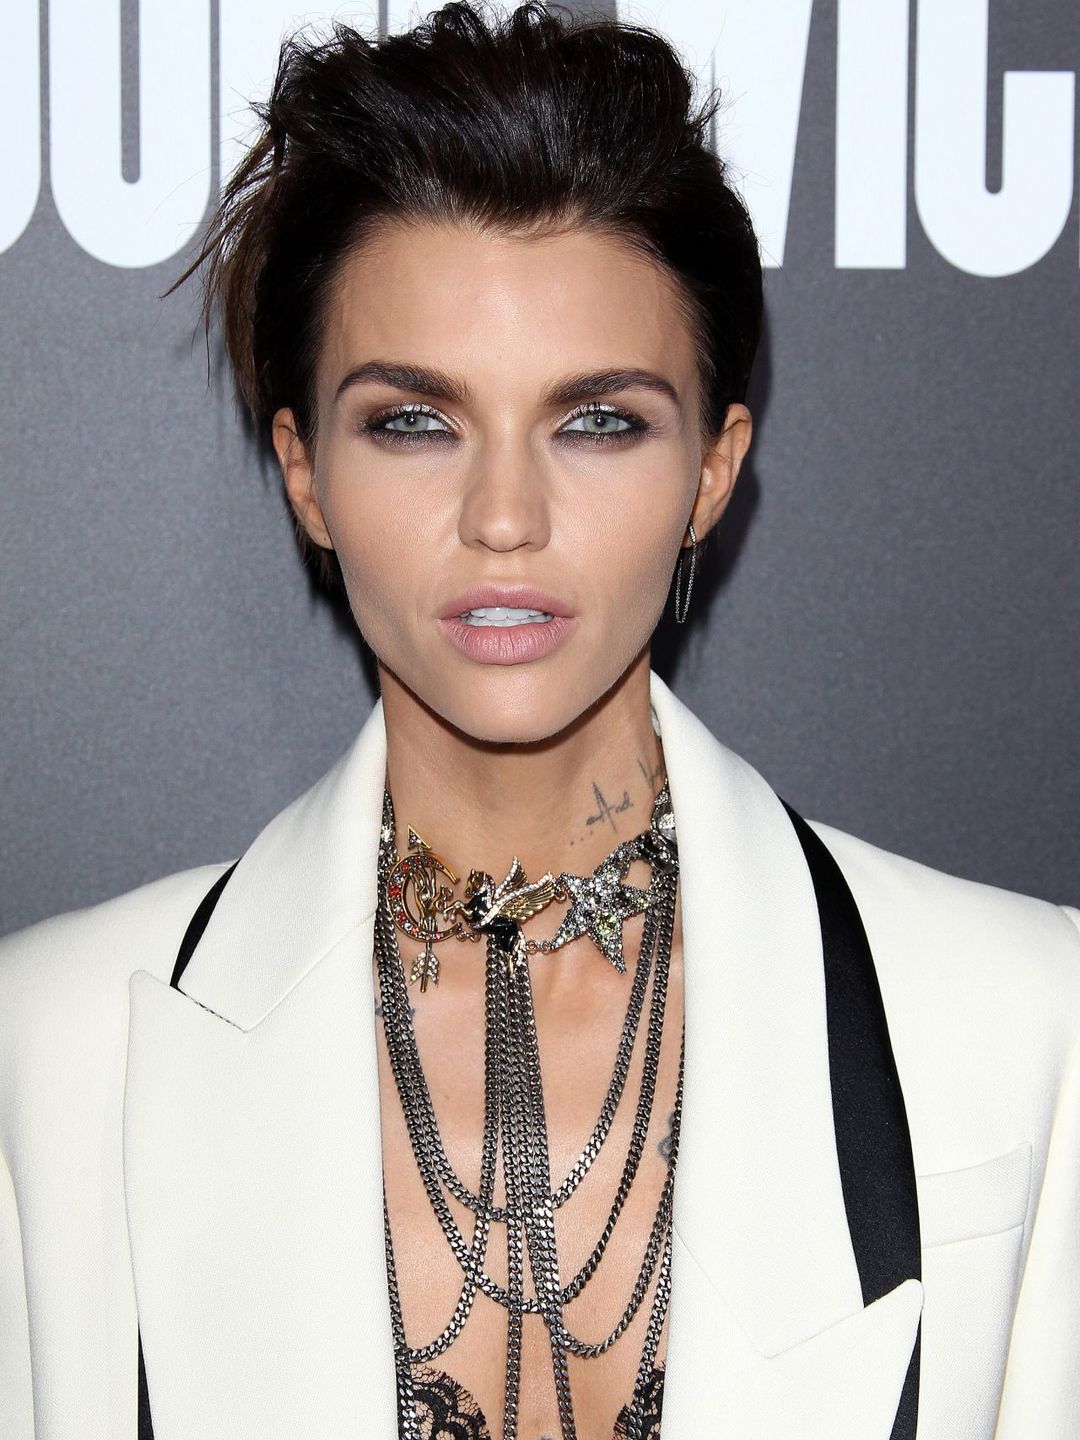 Ruby Rose who are her parents